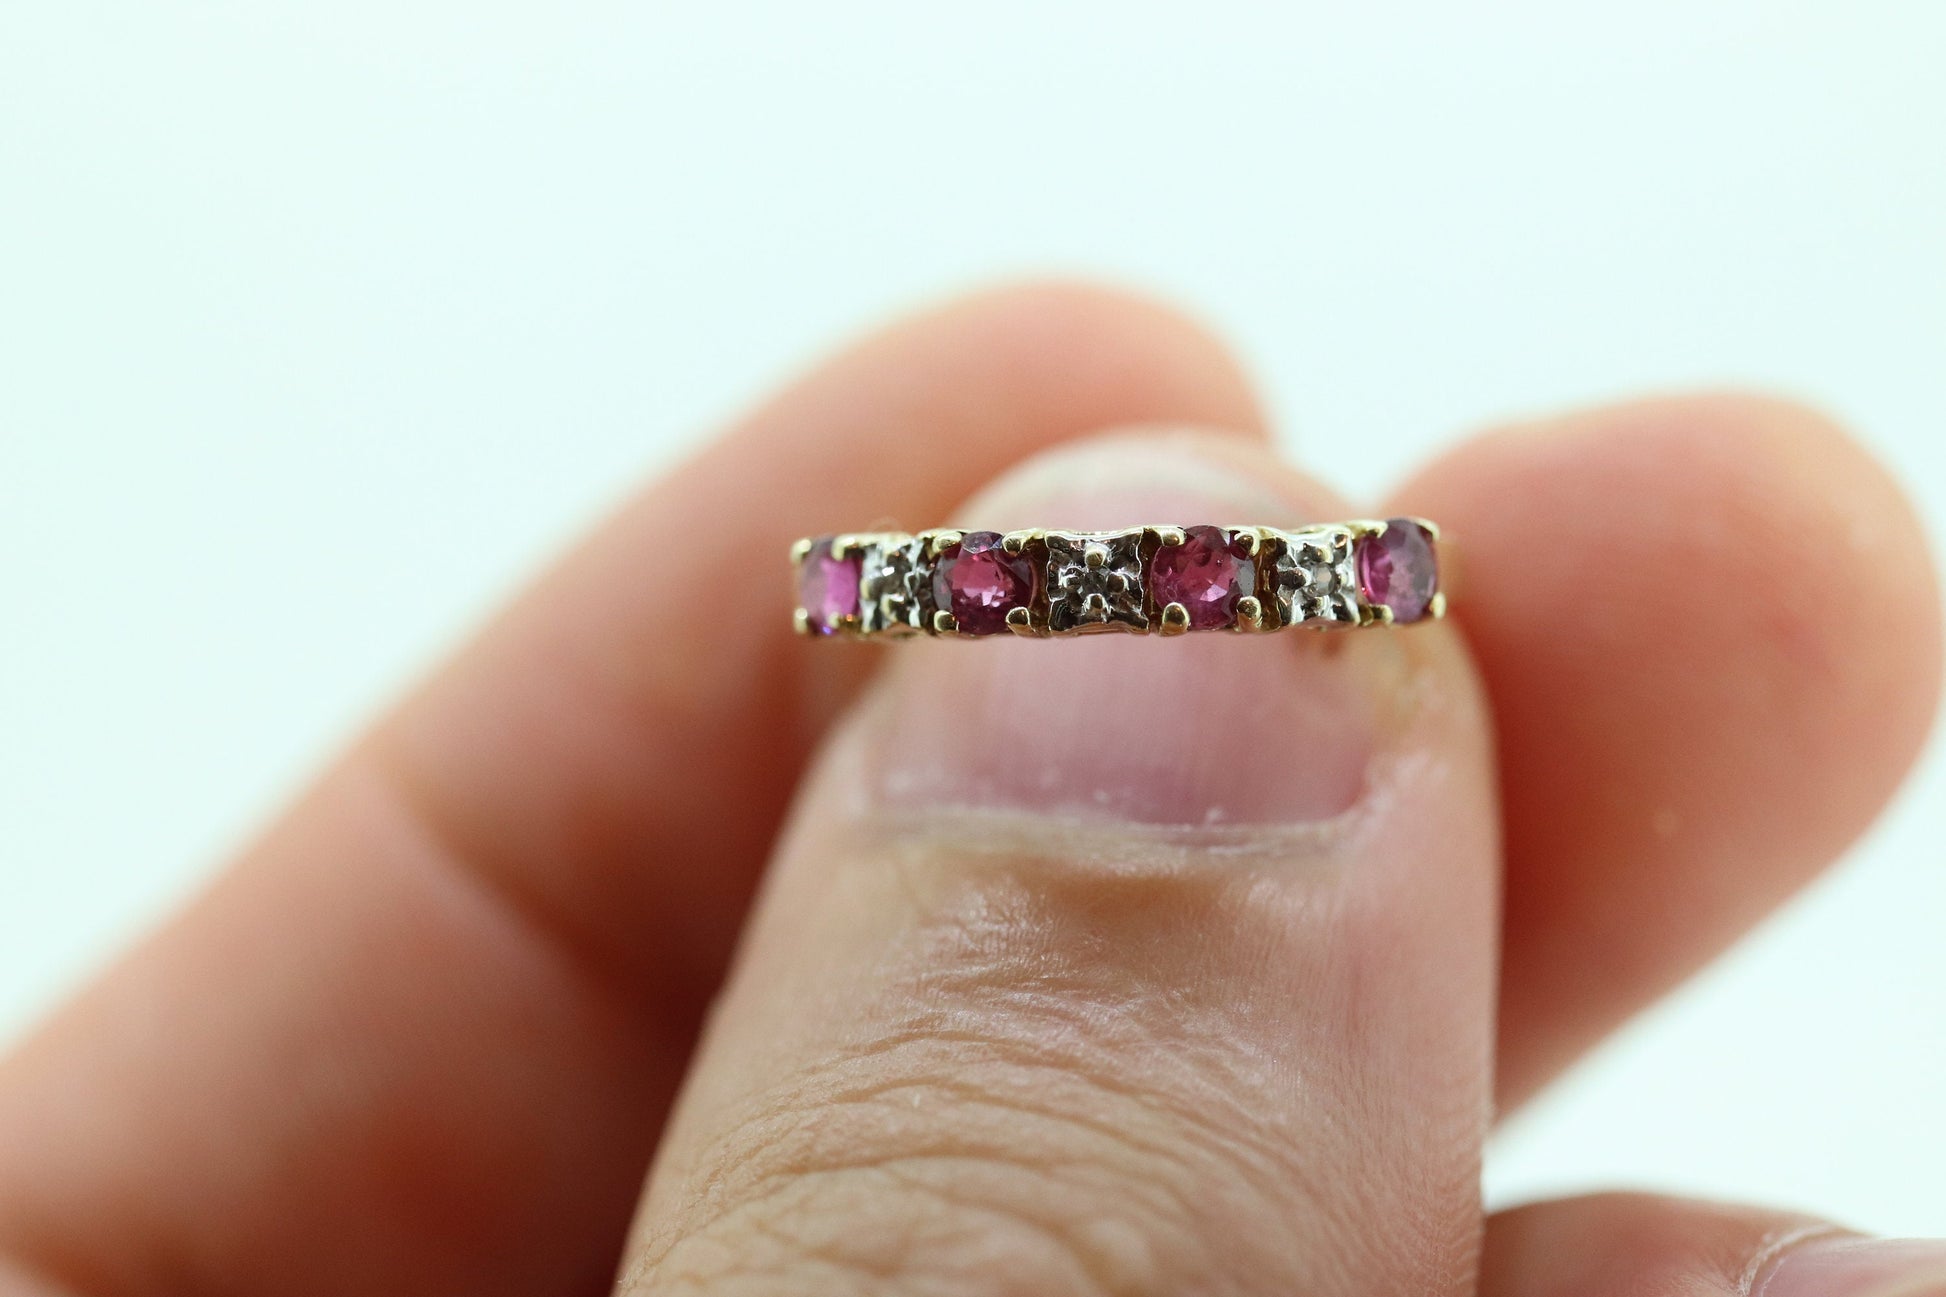 10k Anniversary Ruby Ring. A 10k gold ring with round Ruby and diamond accents eternity band. st(72)